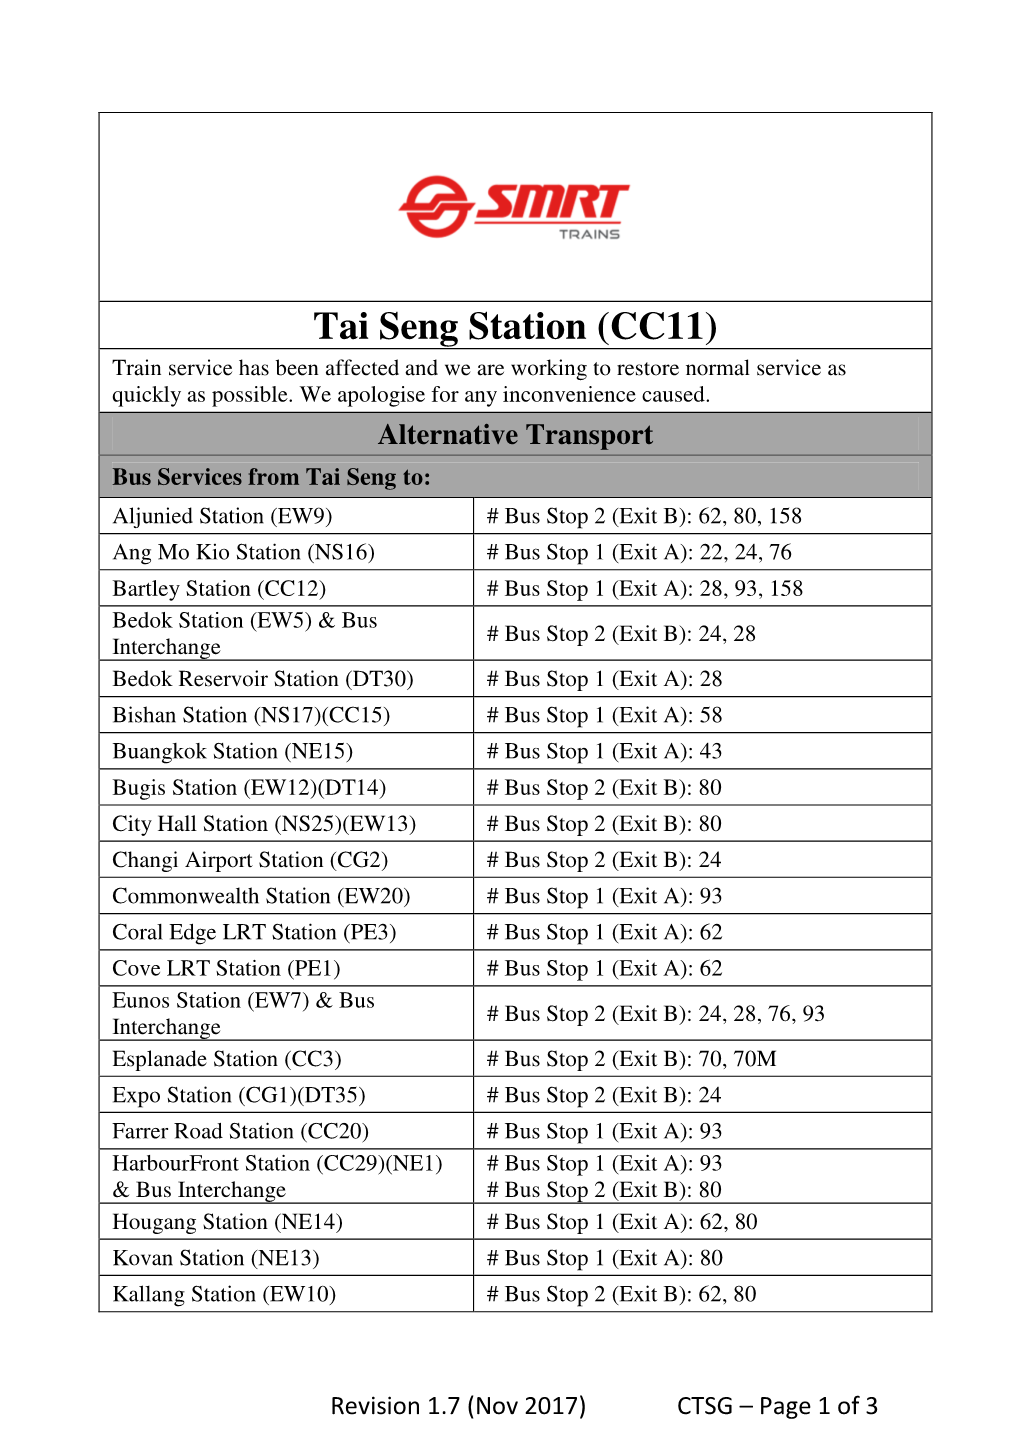 Tai Seng Station (CC11) Train Service Has Been Affected and We Are Working to Restore Normal Service As Quickly As Possible